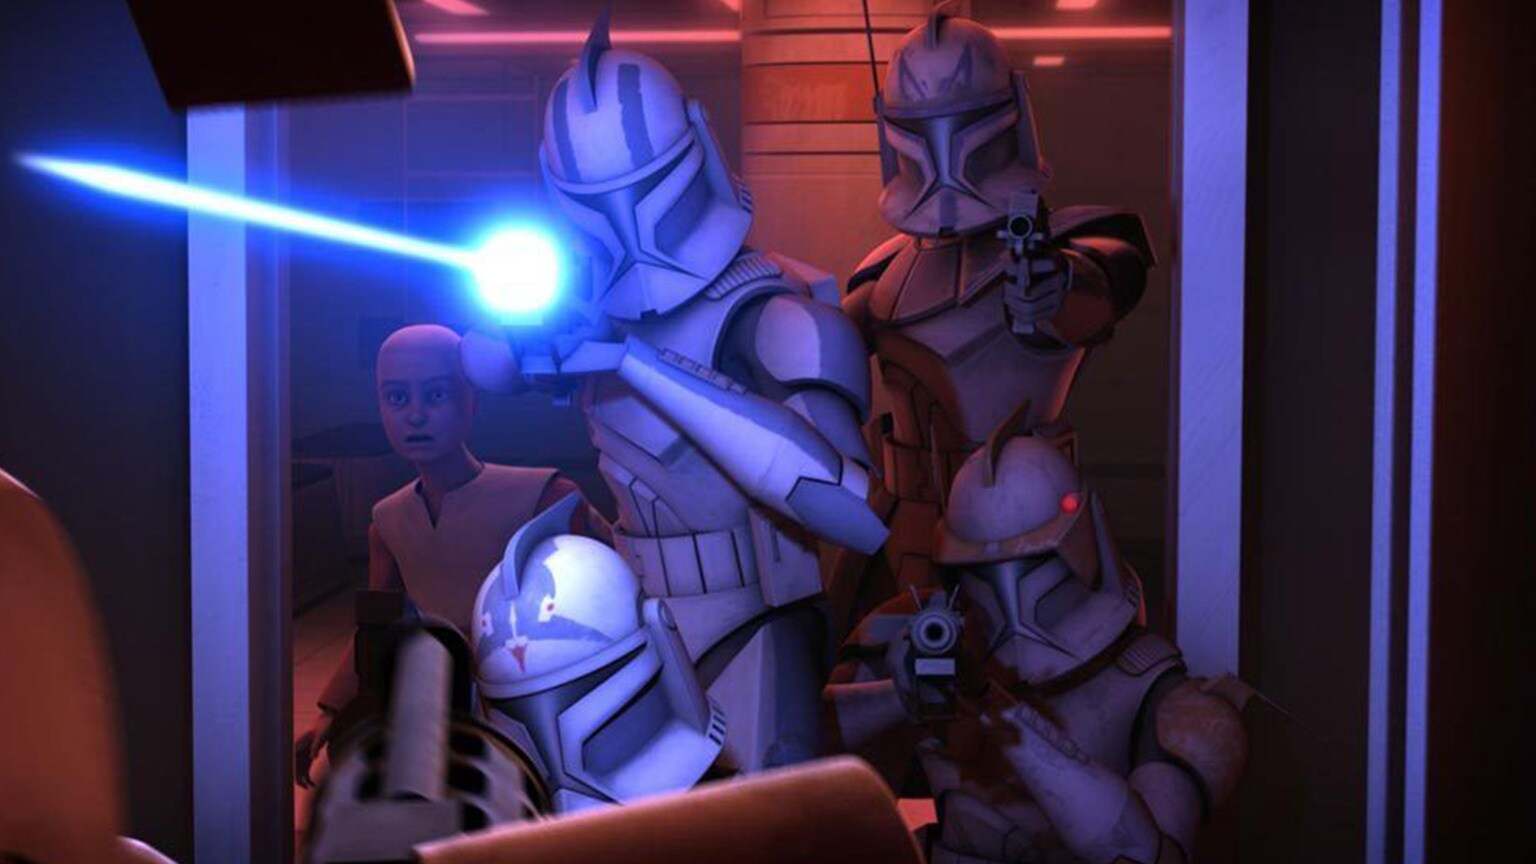 Poll: Which Trooper Armor is Coolest?